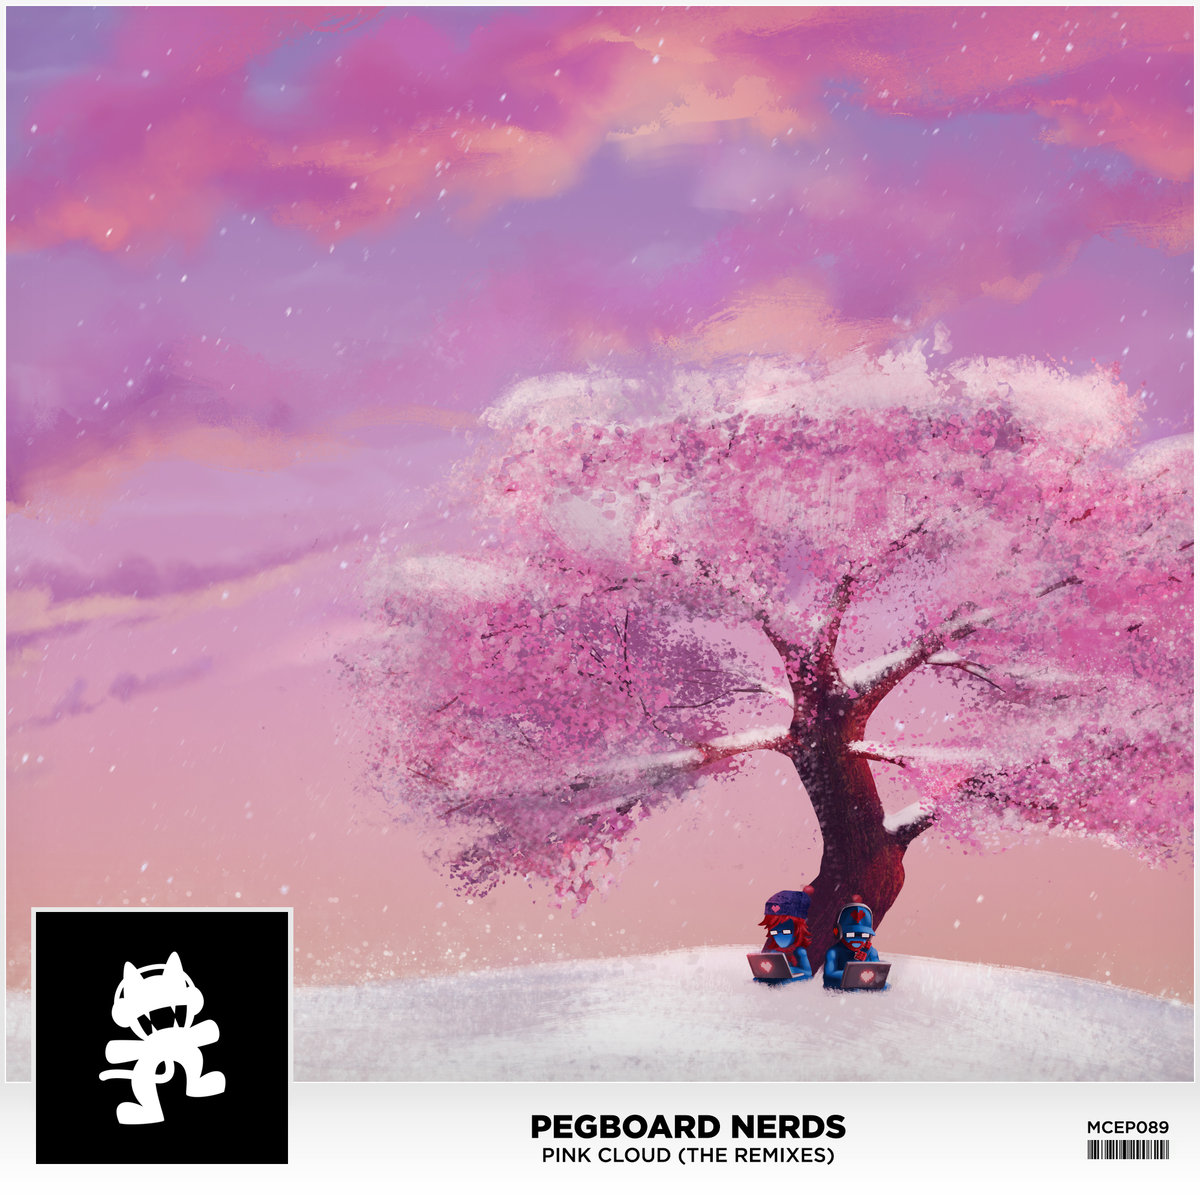 Can Someone Make This In Without The Catalog Number - Pegboard Nerds Pink Cloud Remixes - HD Wallpaper 